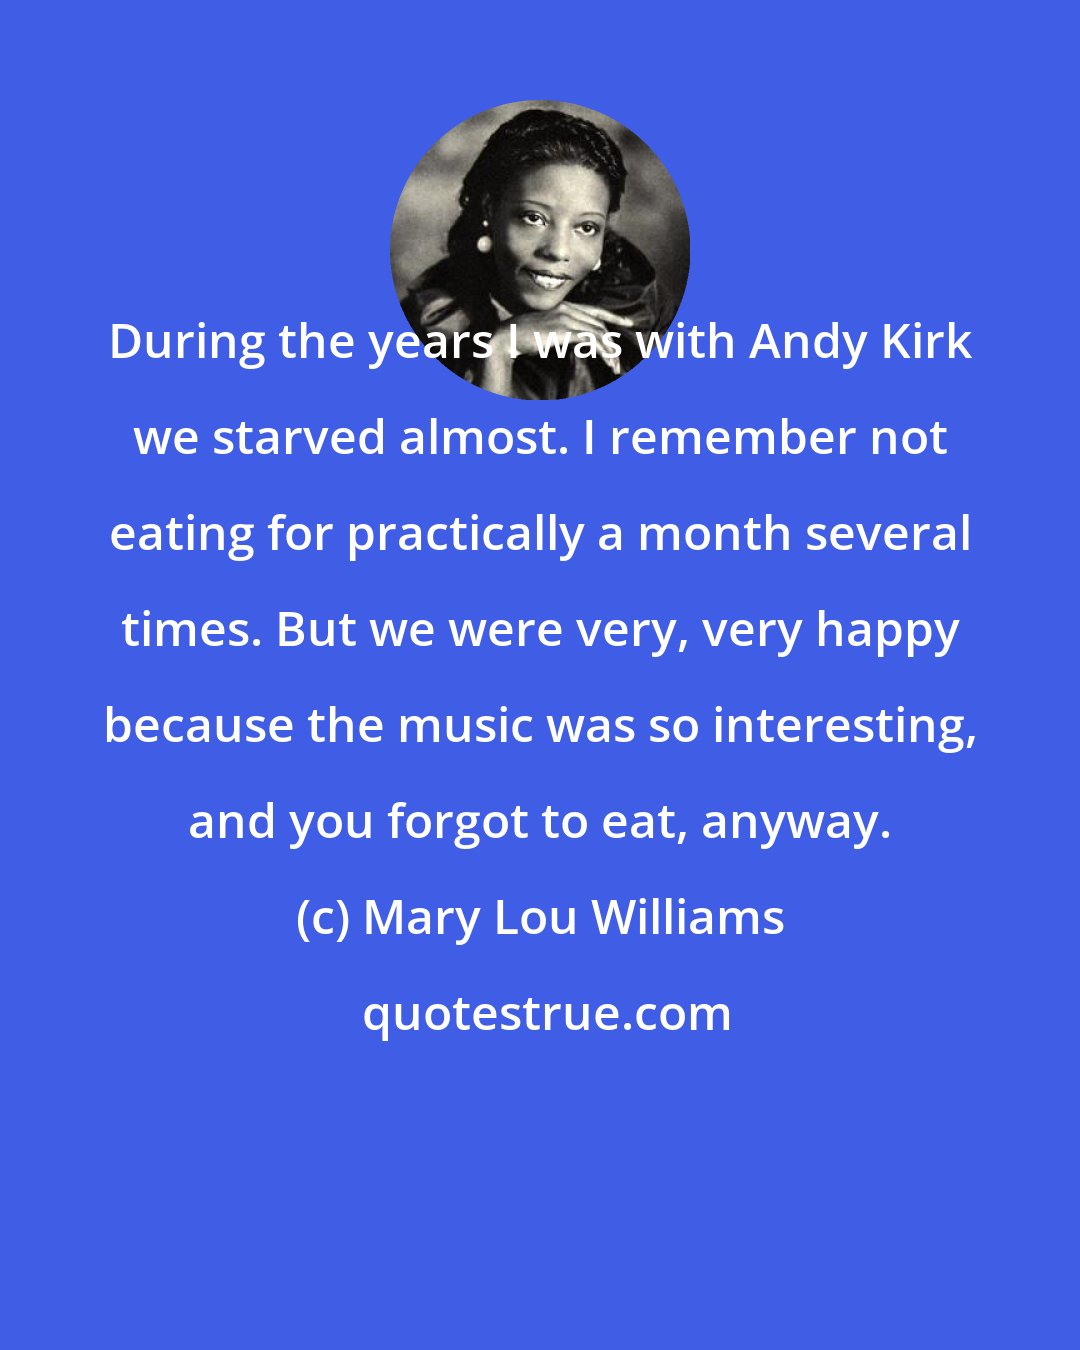 Mary Lou Williams: During the years I was with Andy Kirk we starved almost. I remember not eating for practically a month several times. But we were very, very happy because the music was so interesting, and you forgot to eat, anyway.